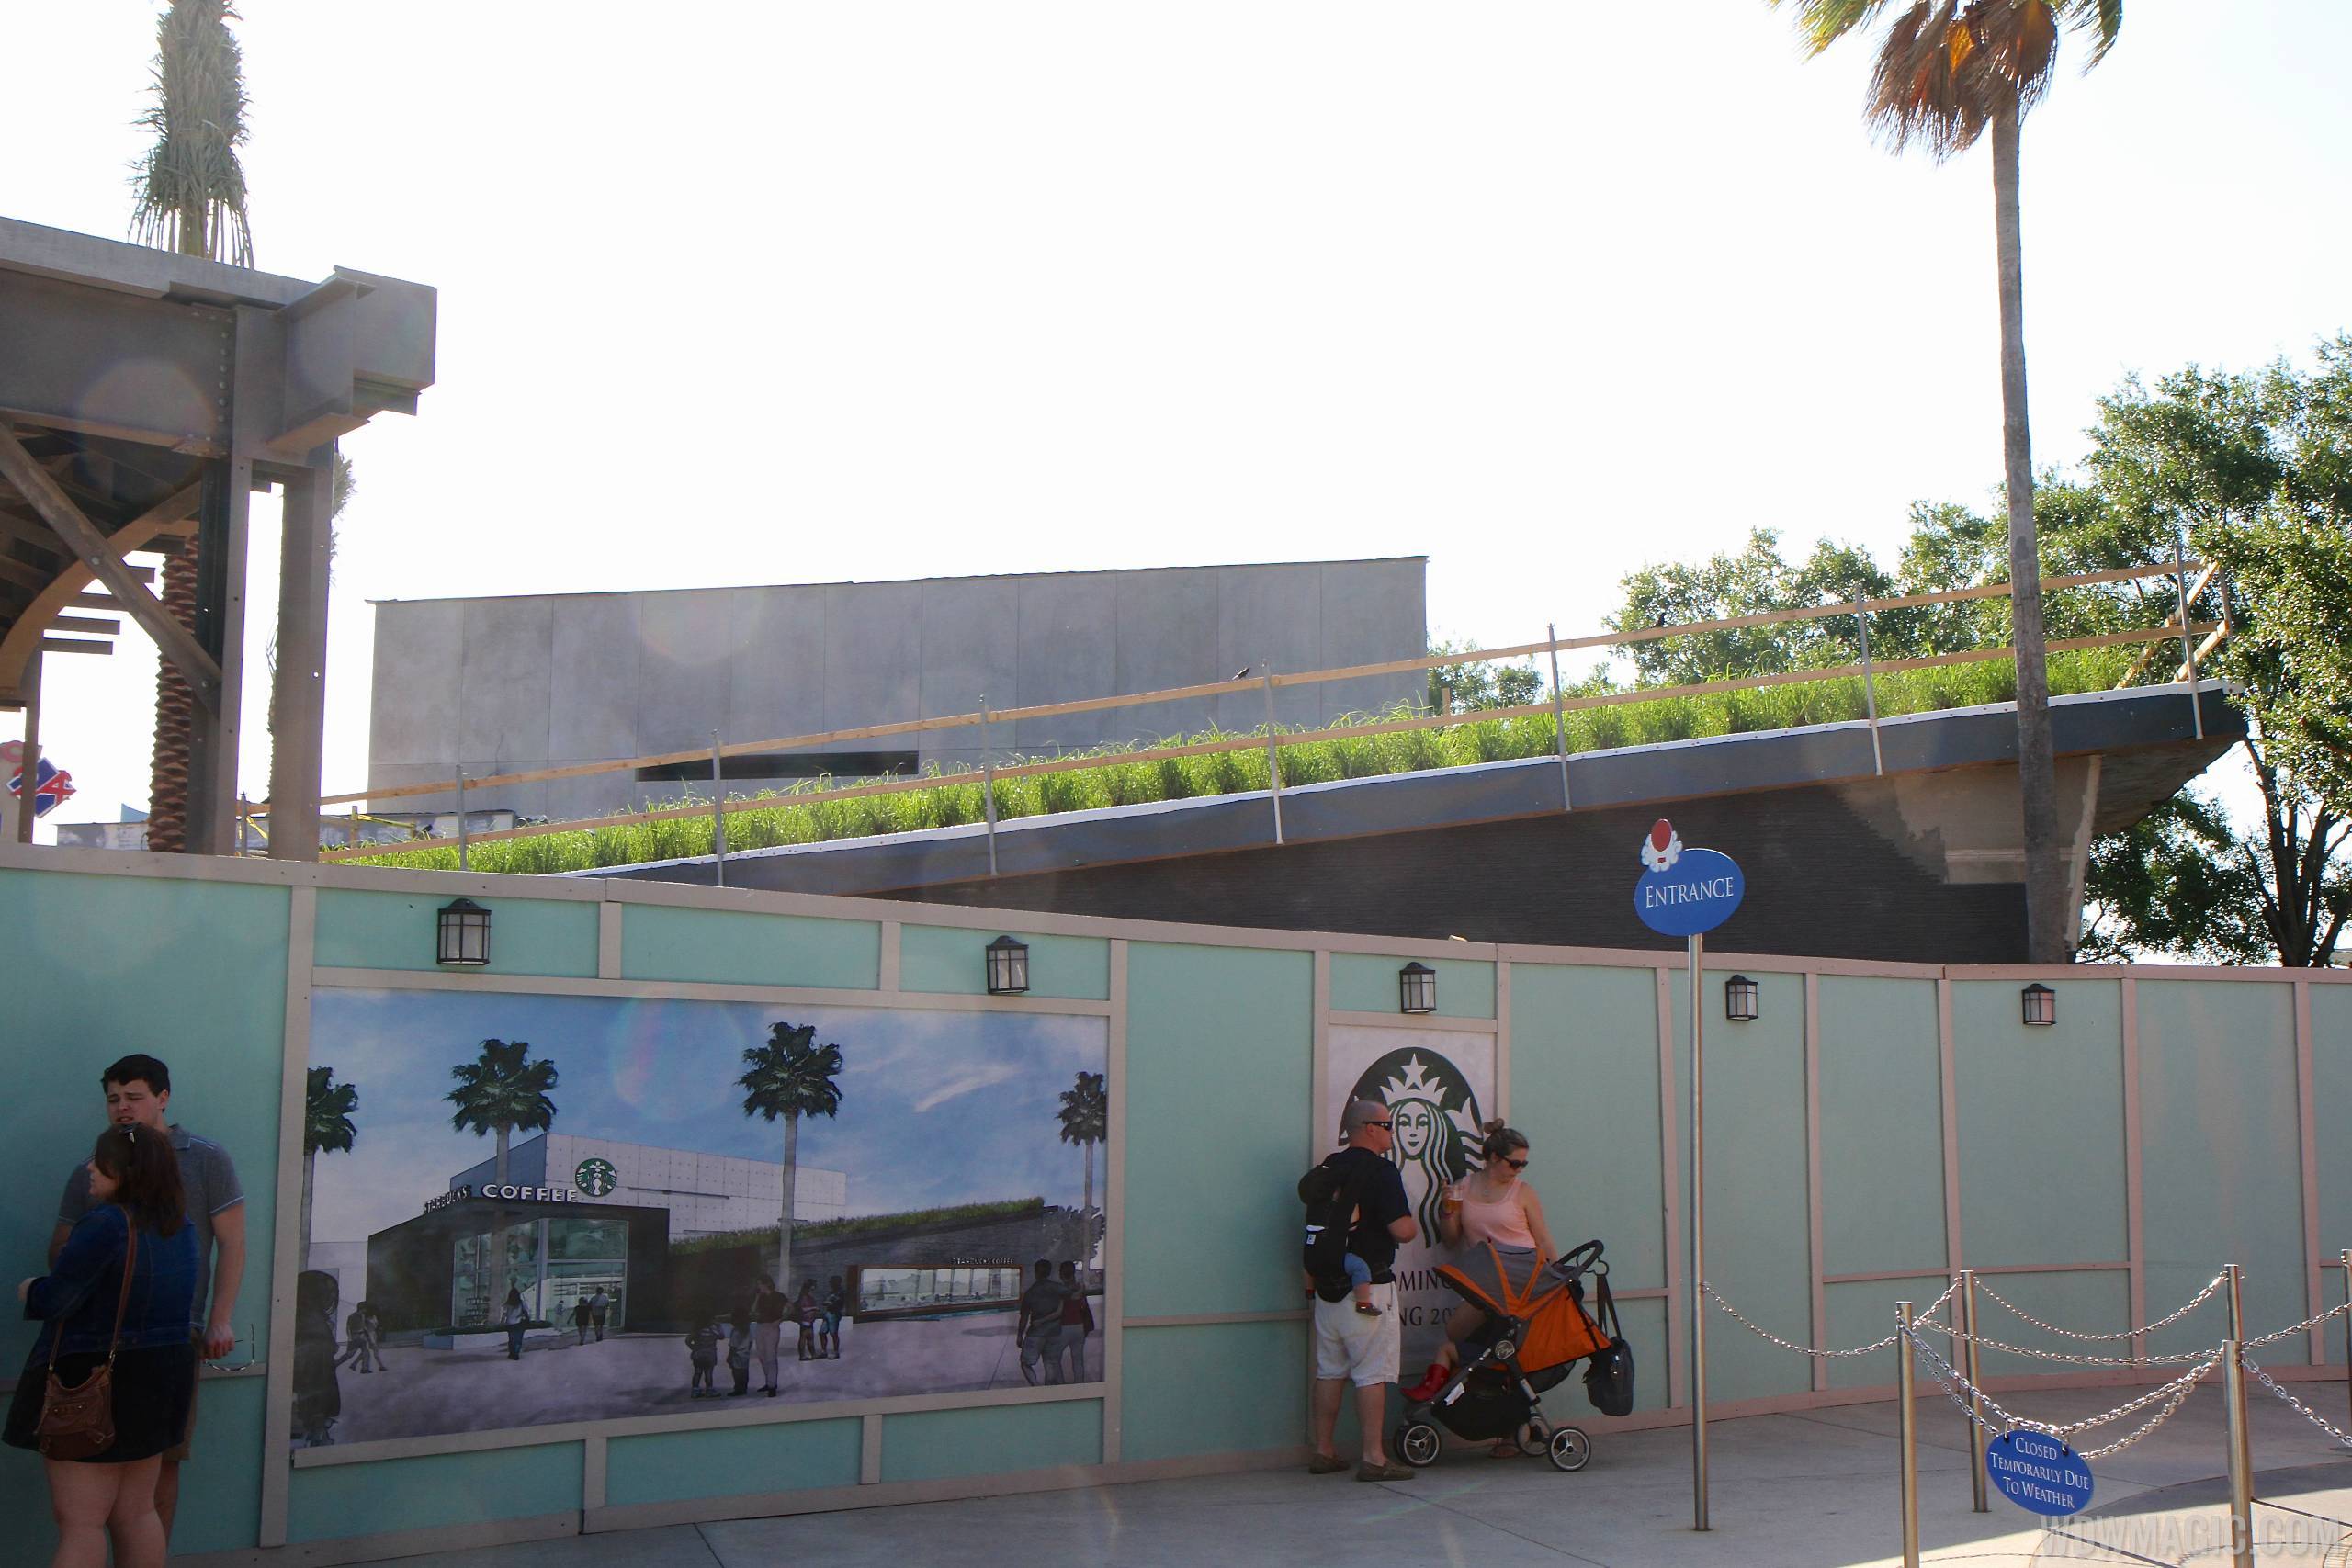 PHOTOS - Grass roof now in place on the Starbucks West Side at Downtown Disney